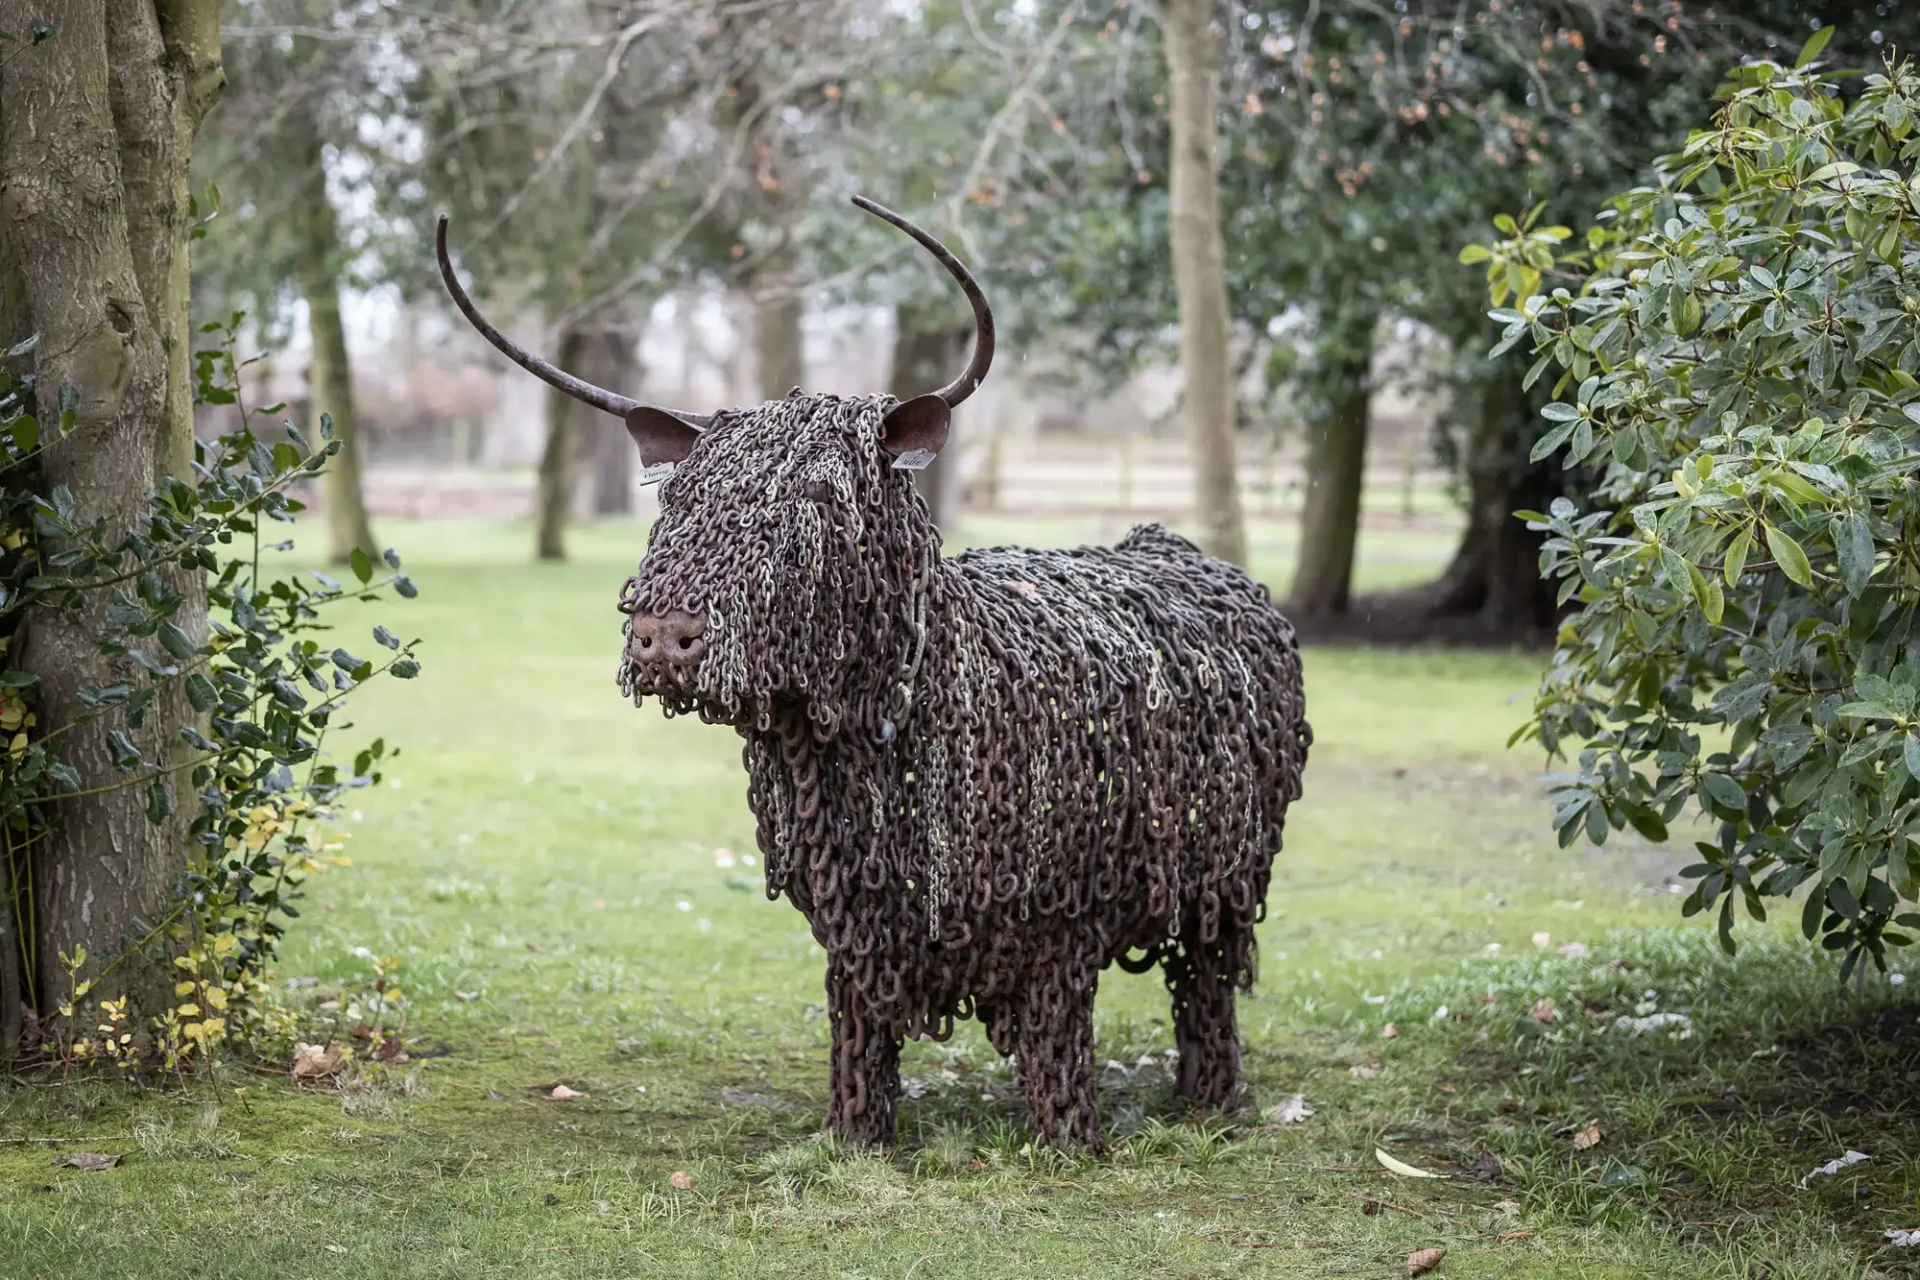 A sculpture of a bull made entirely from metal chains, displayed outdoors among trees and bushes.